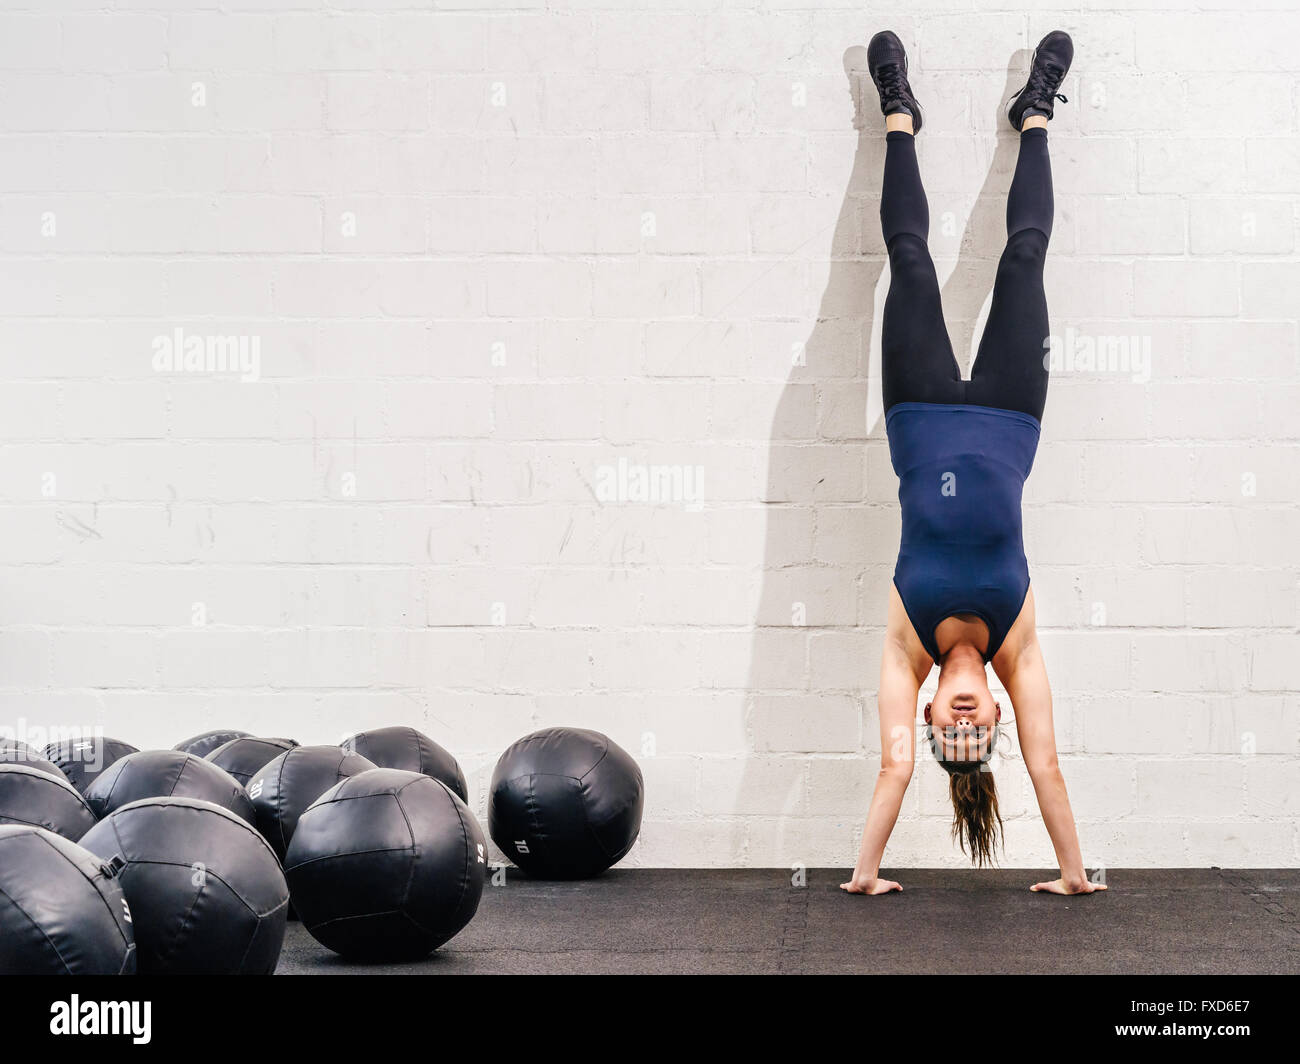 Photo of a young fit woman doing a handstand exercise at a crossfit gym. Stock Photo